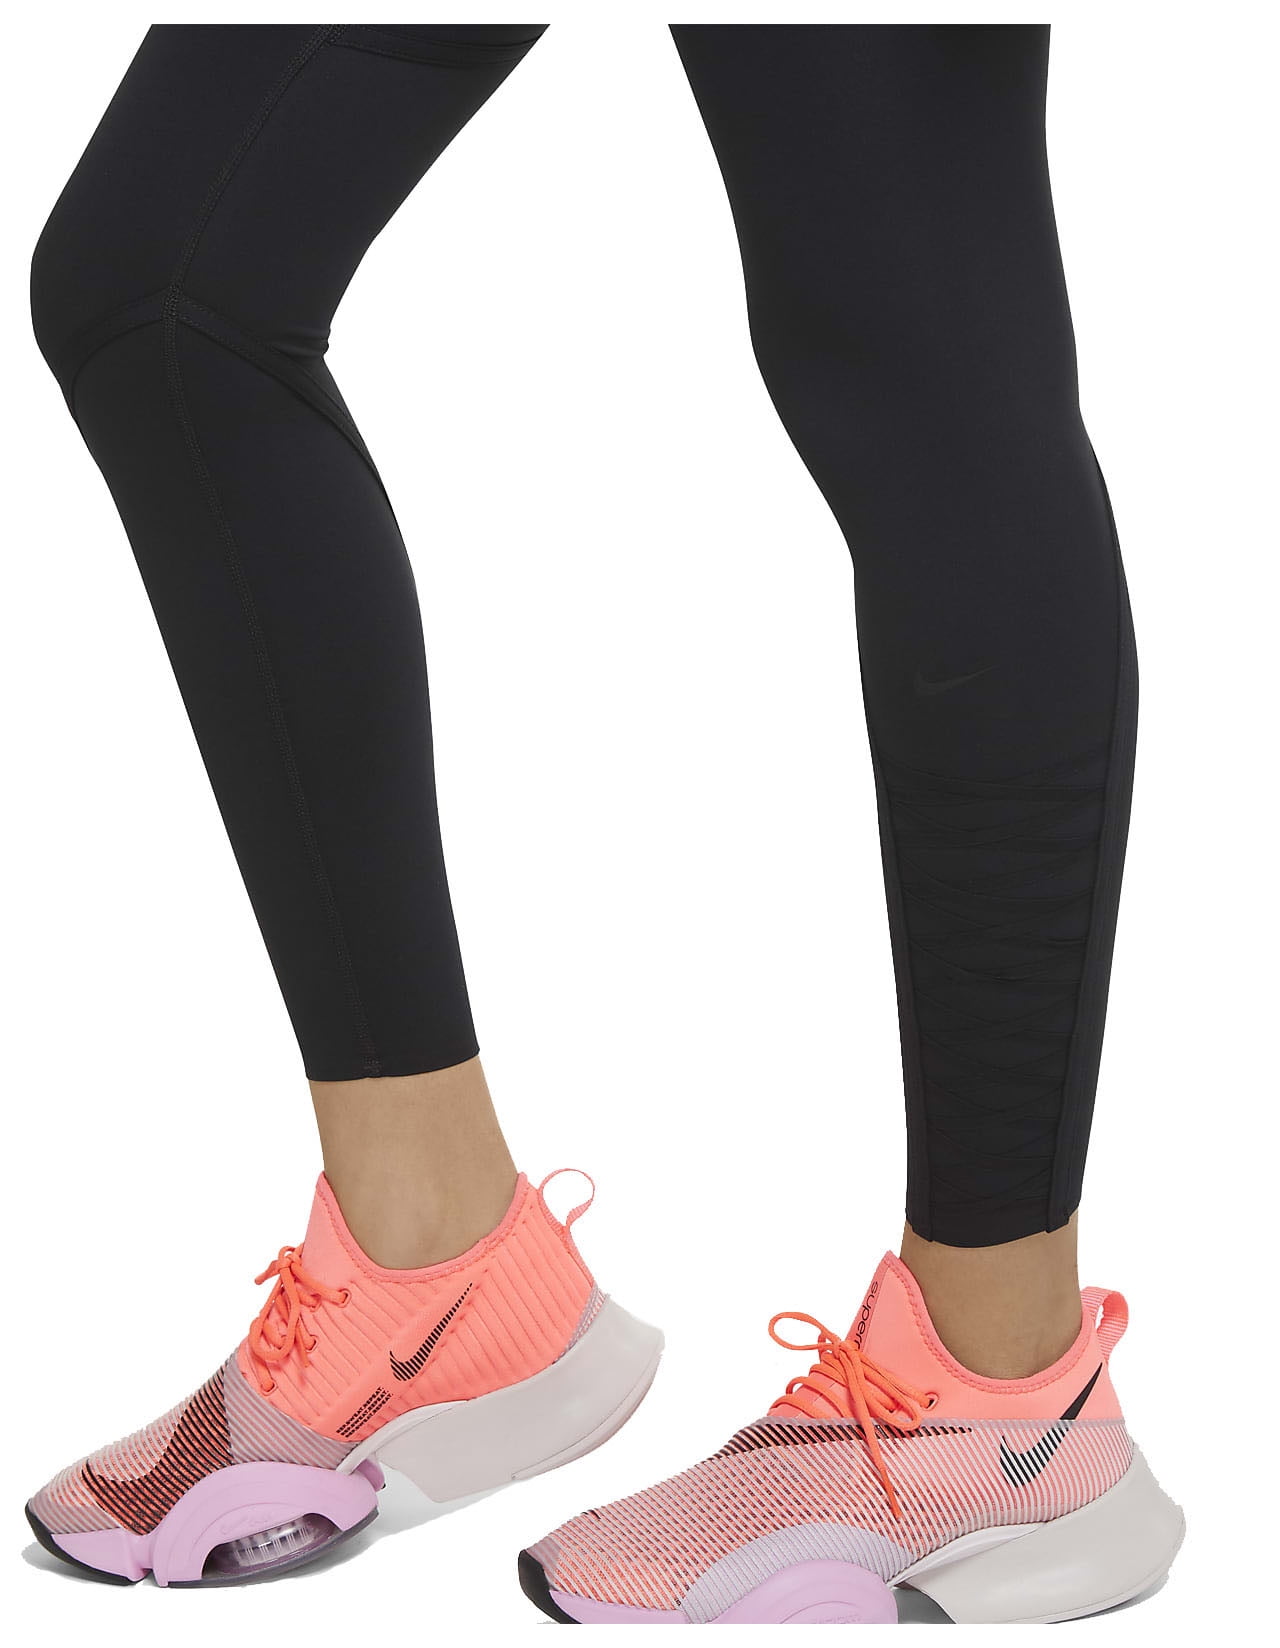 Nike Women's One Luxe Mid Rise 7/8 Laced Legging (Black, X-Large) 